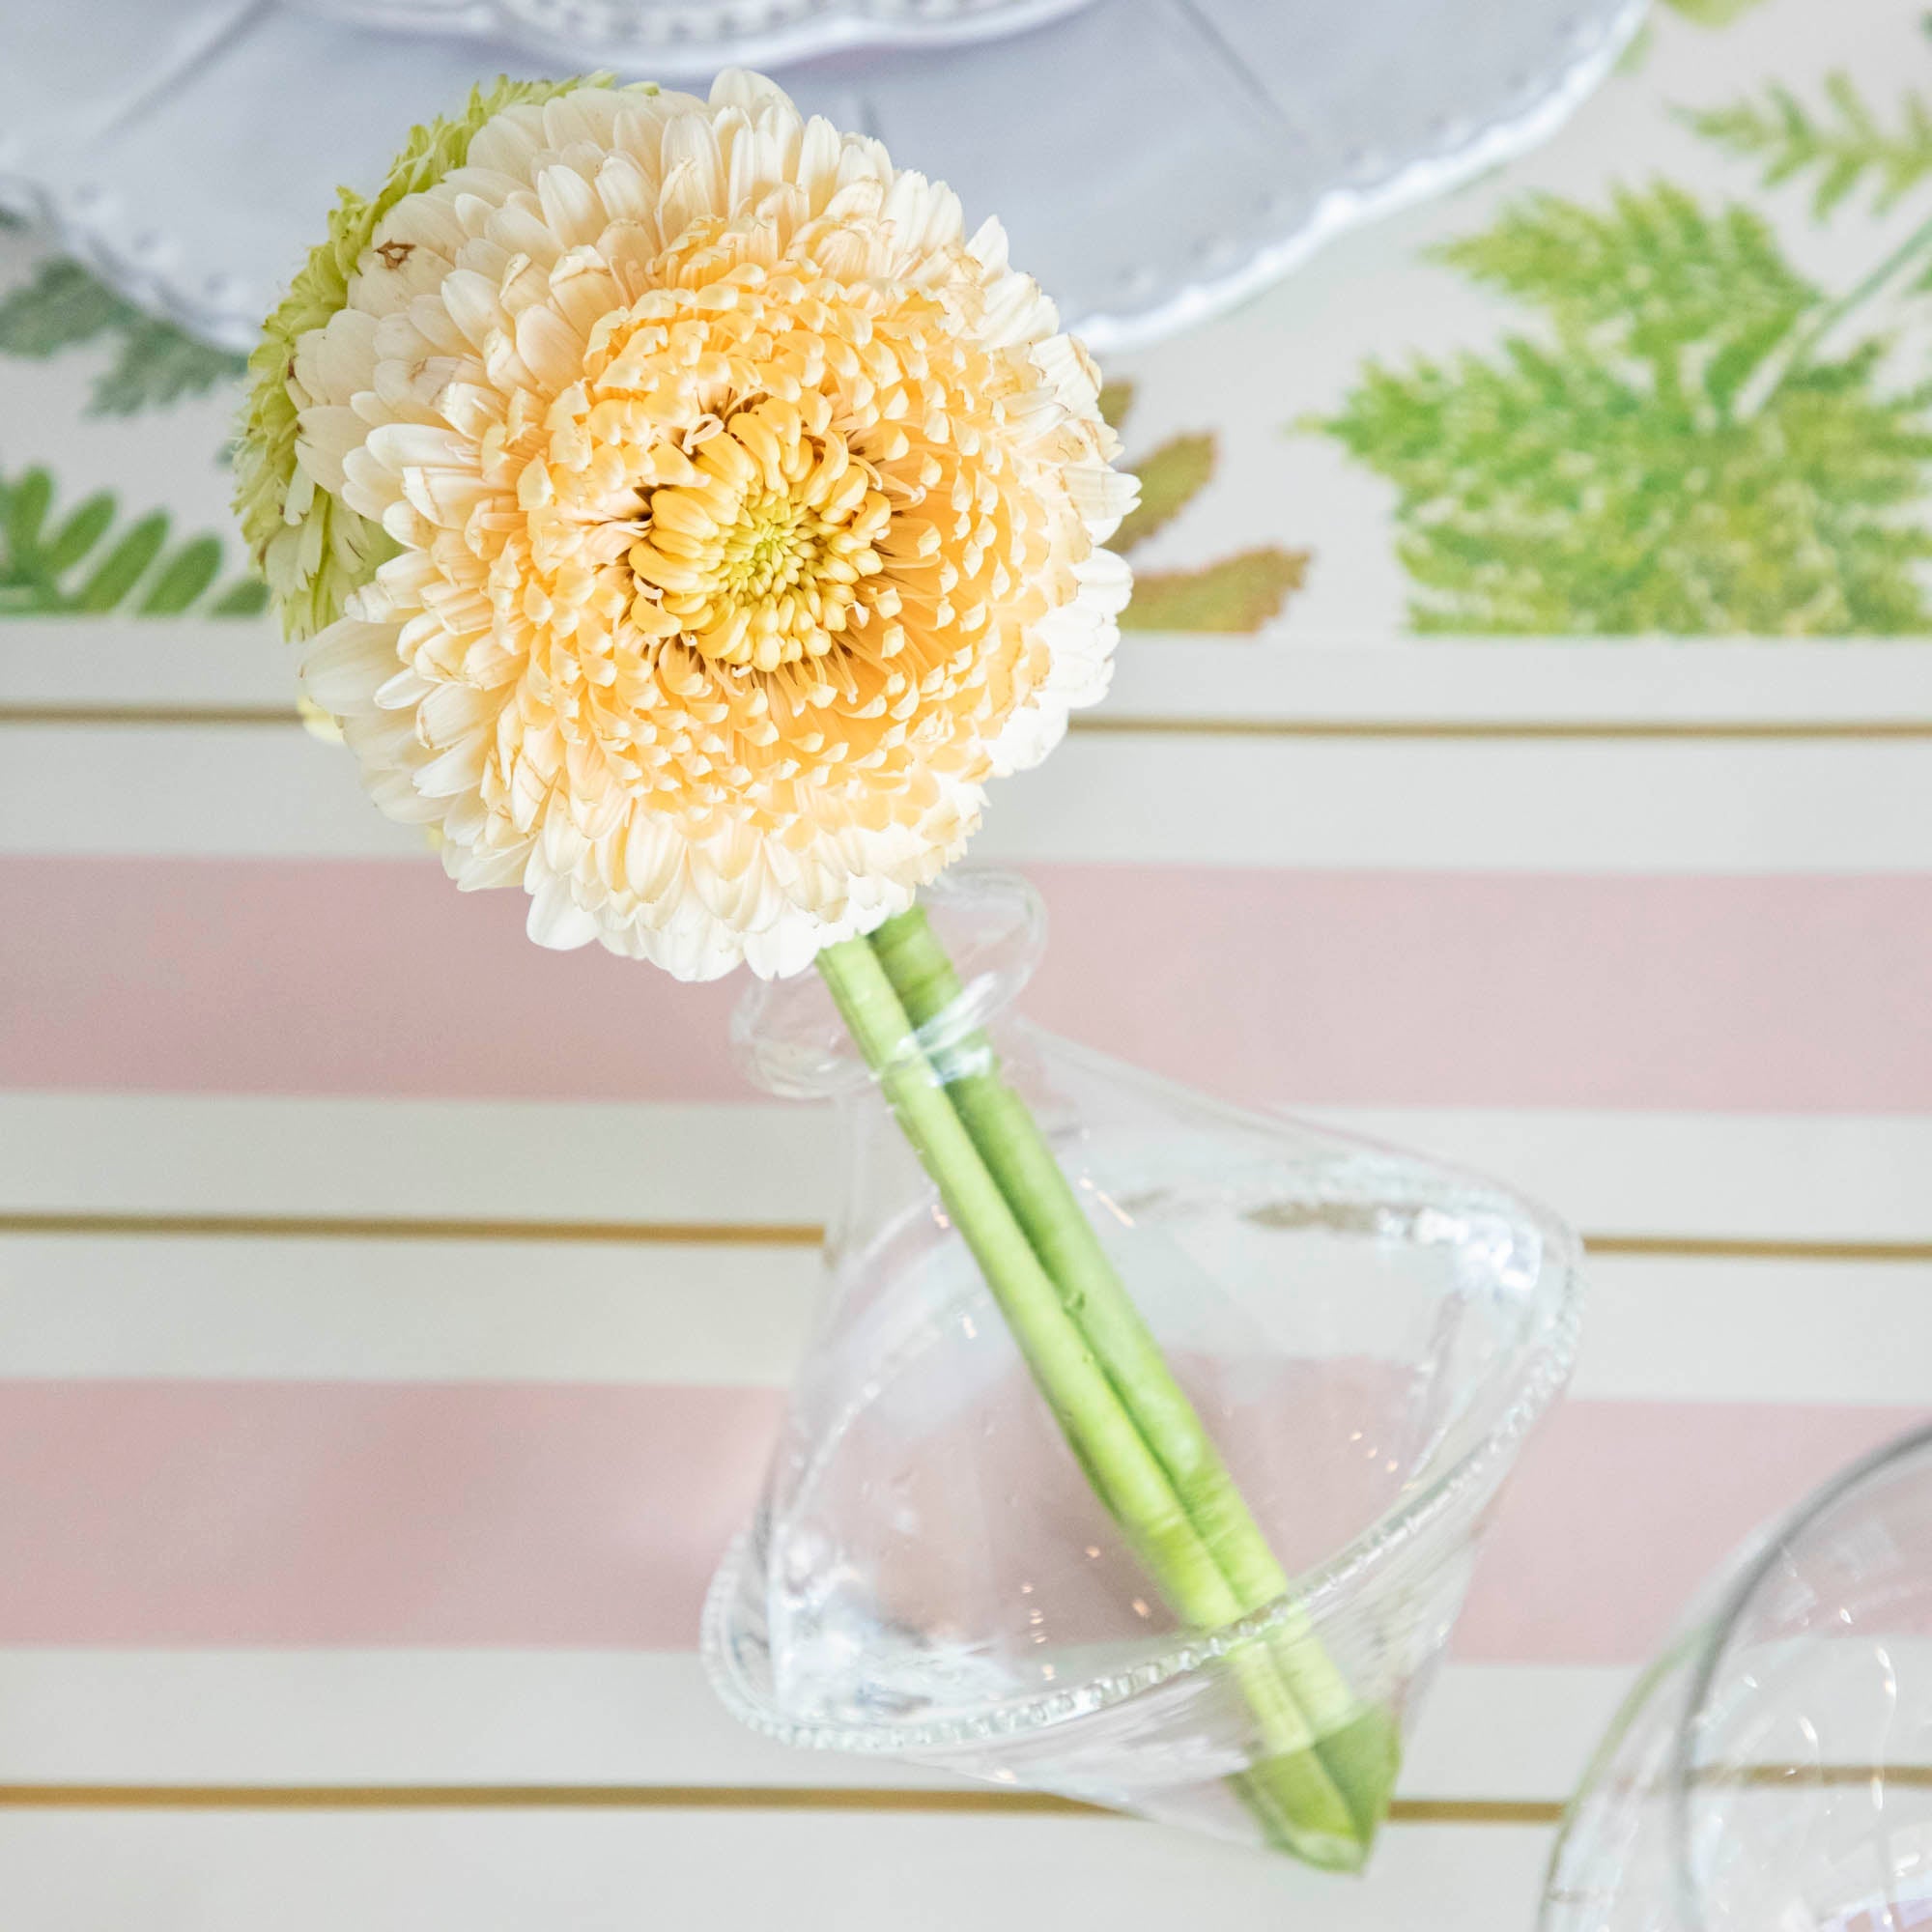 A Qualia mouth blown clear vase with a small bouquet of yellow flowers on a table.